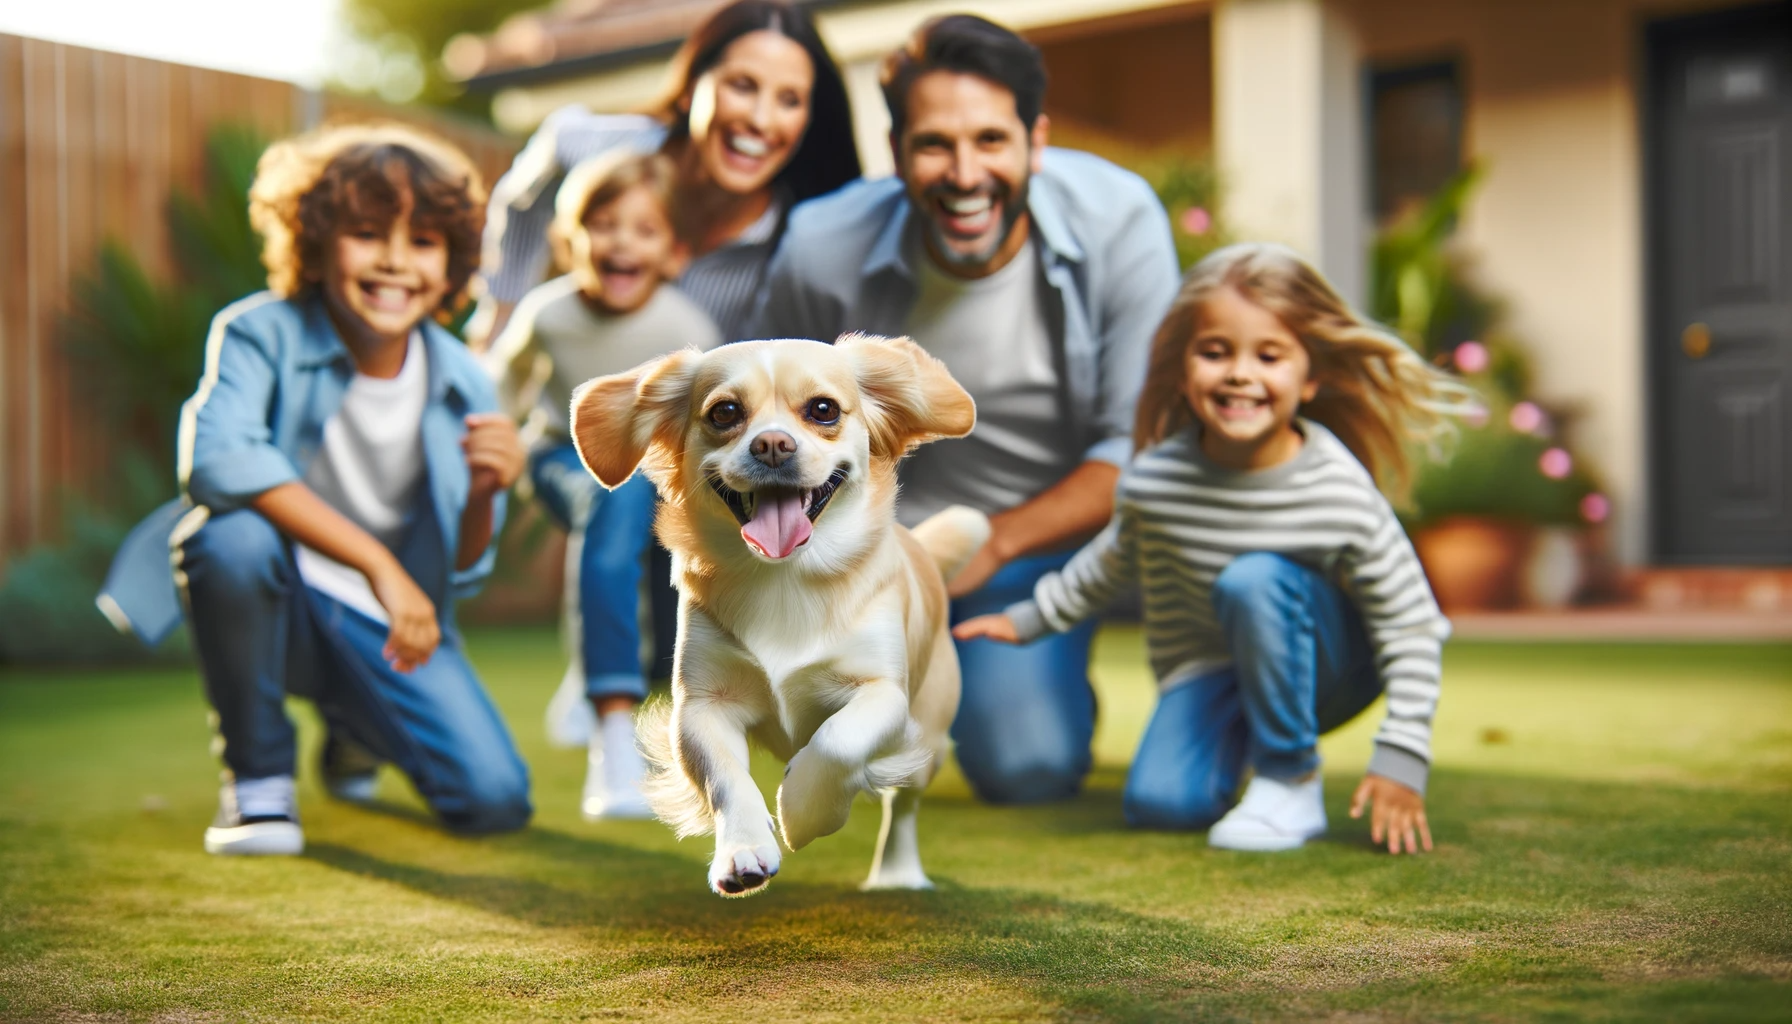 A playful Labrahuahua running through the yard, surrounded by a smiling family